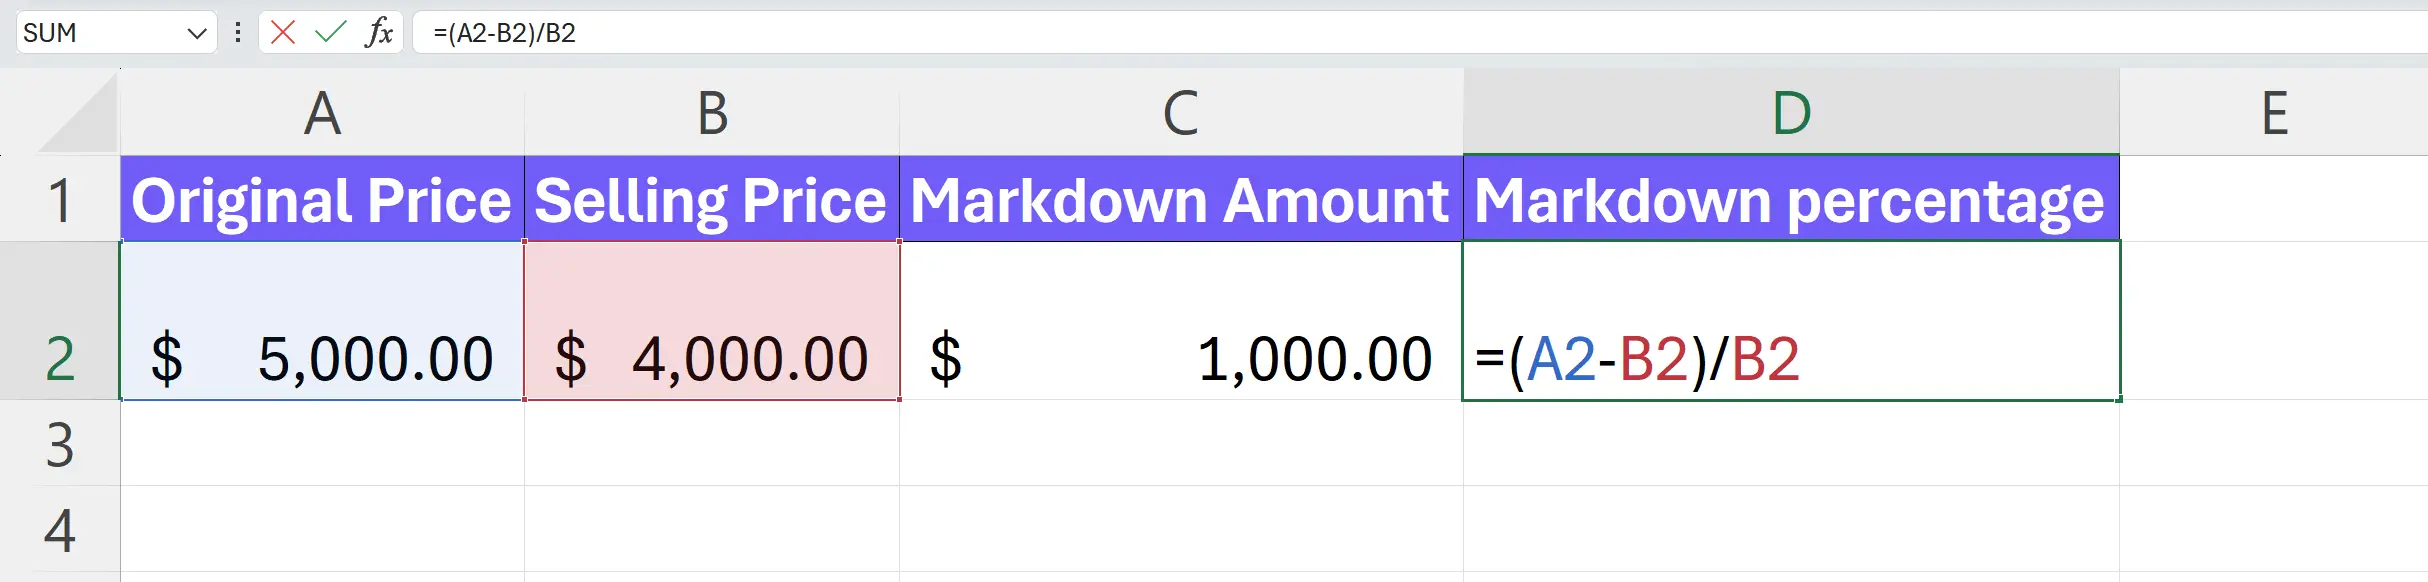 Markdown percentage calculation in excel, example screenshot